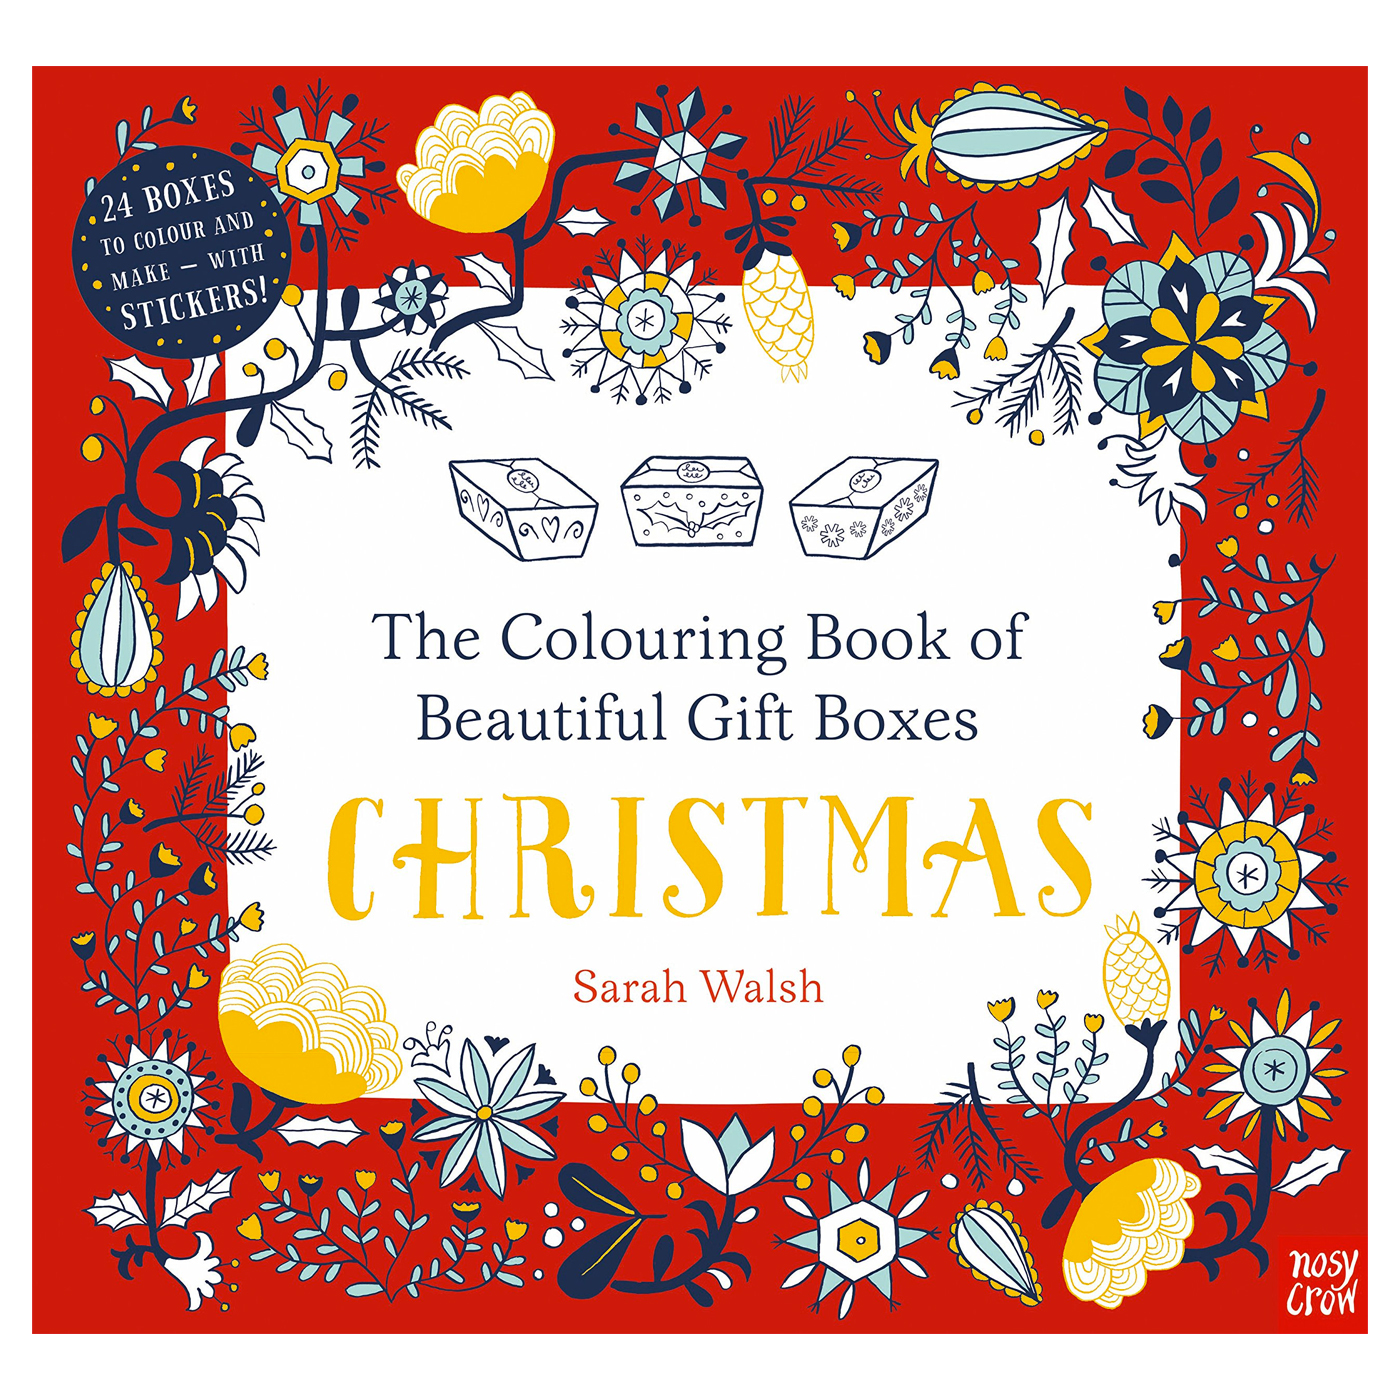  The Colouring Book of Beautiful Gift Boxes: Christmas